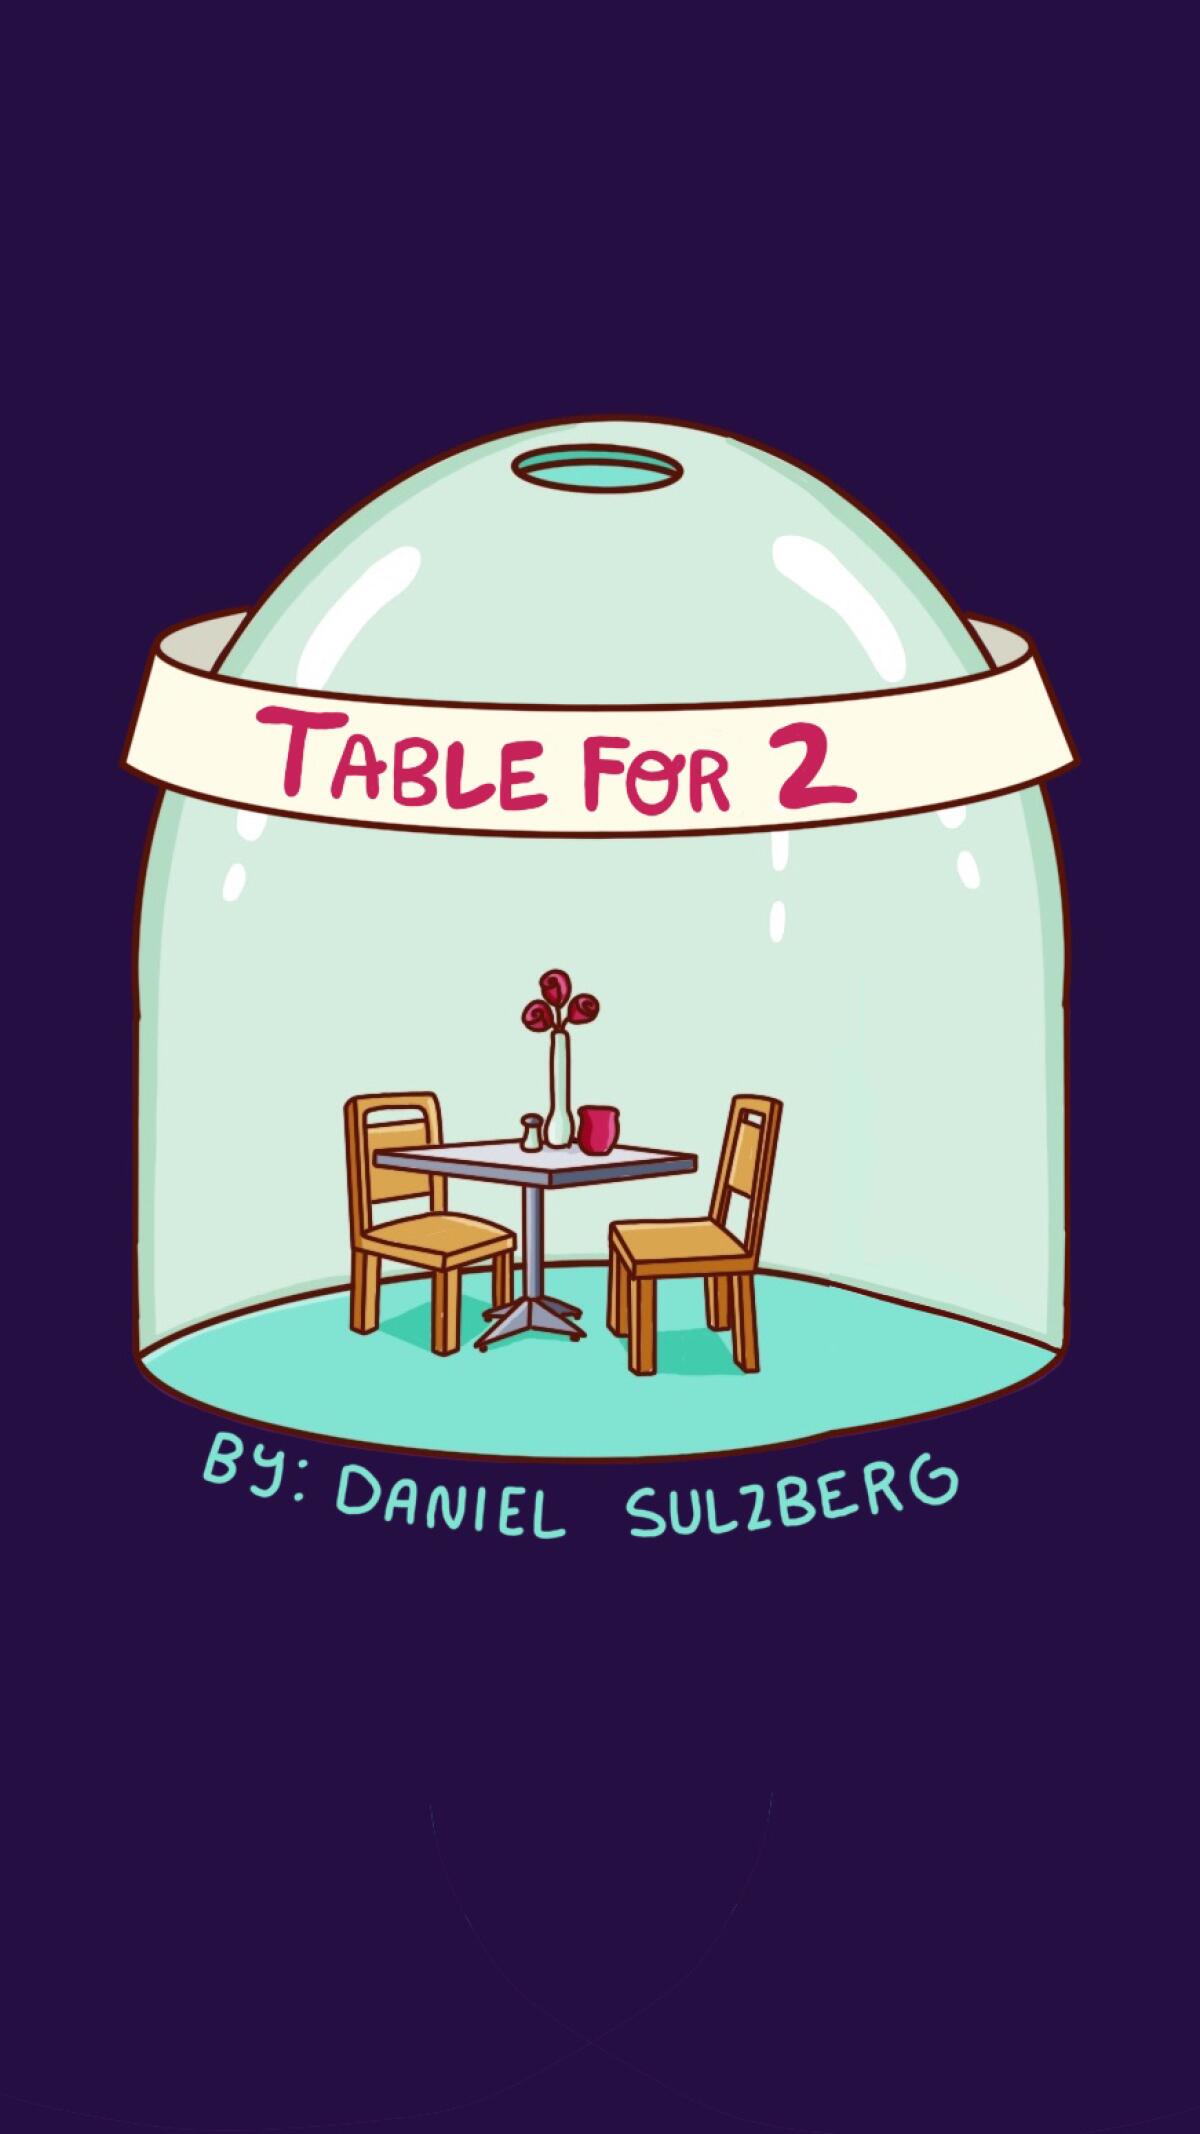 Table for 2, a comic by Daniel Sulzberg.